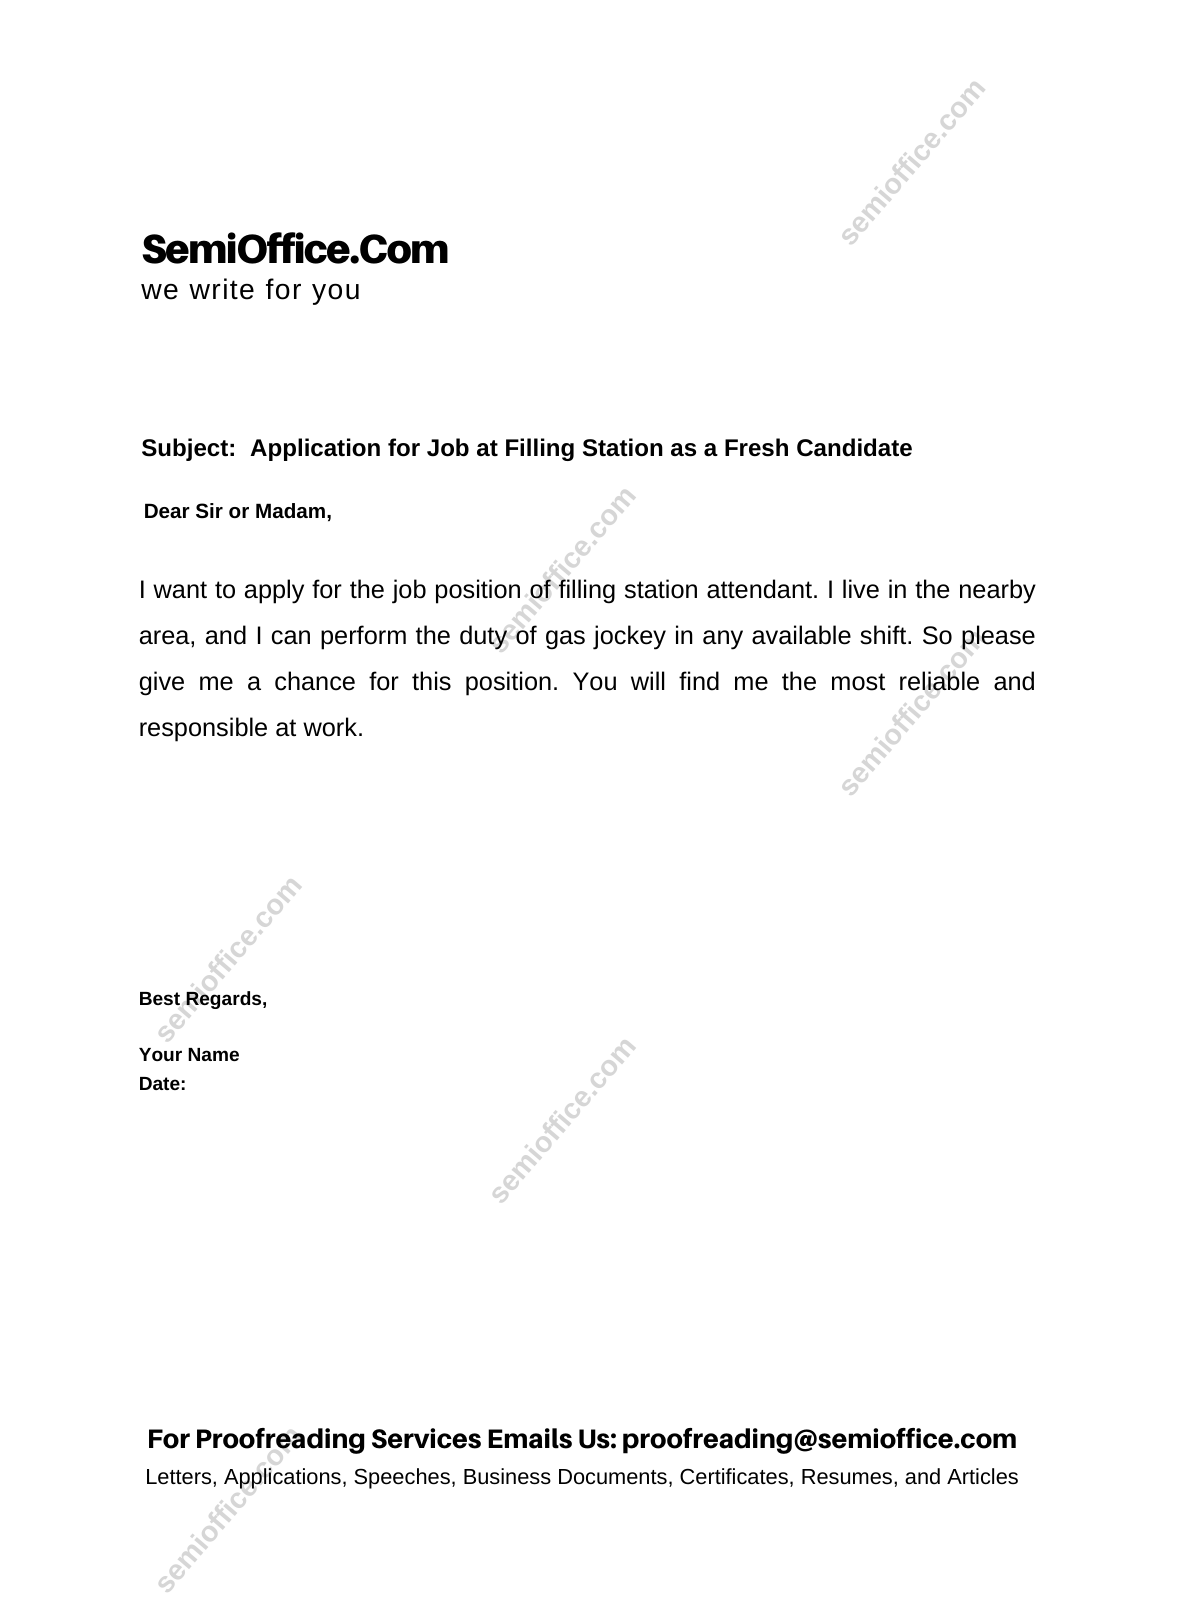 write application letter to a filling station